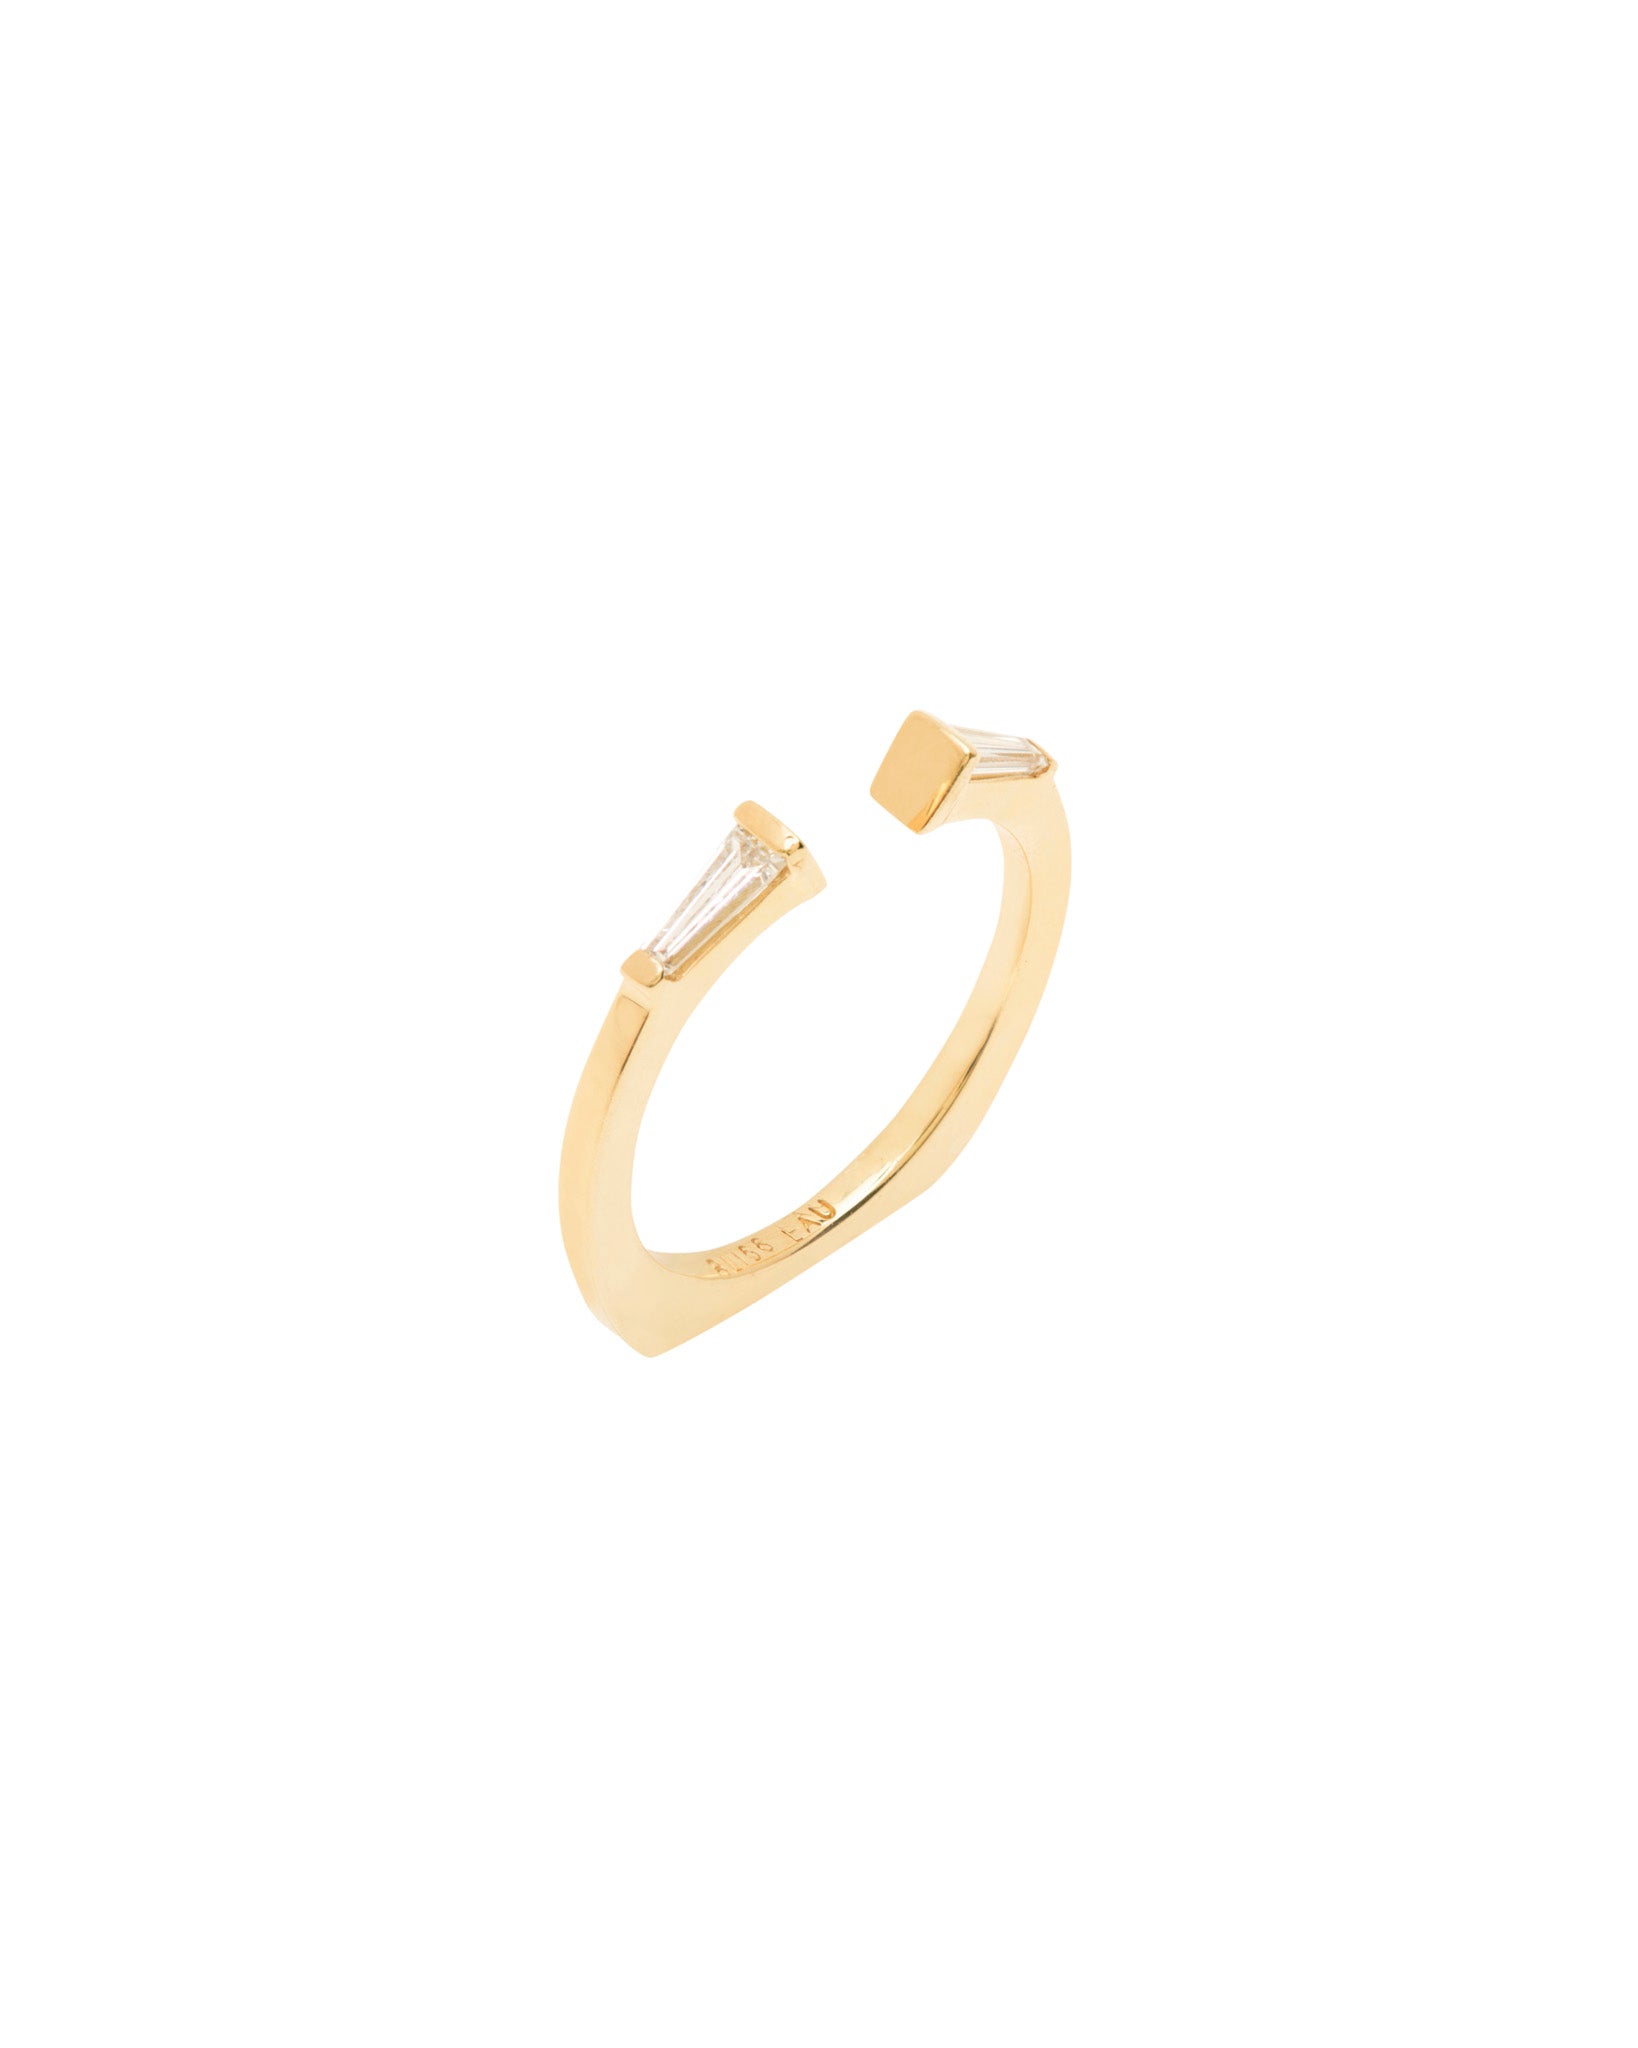 Perspective Band Top VIew Gold and diamonds